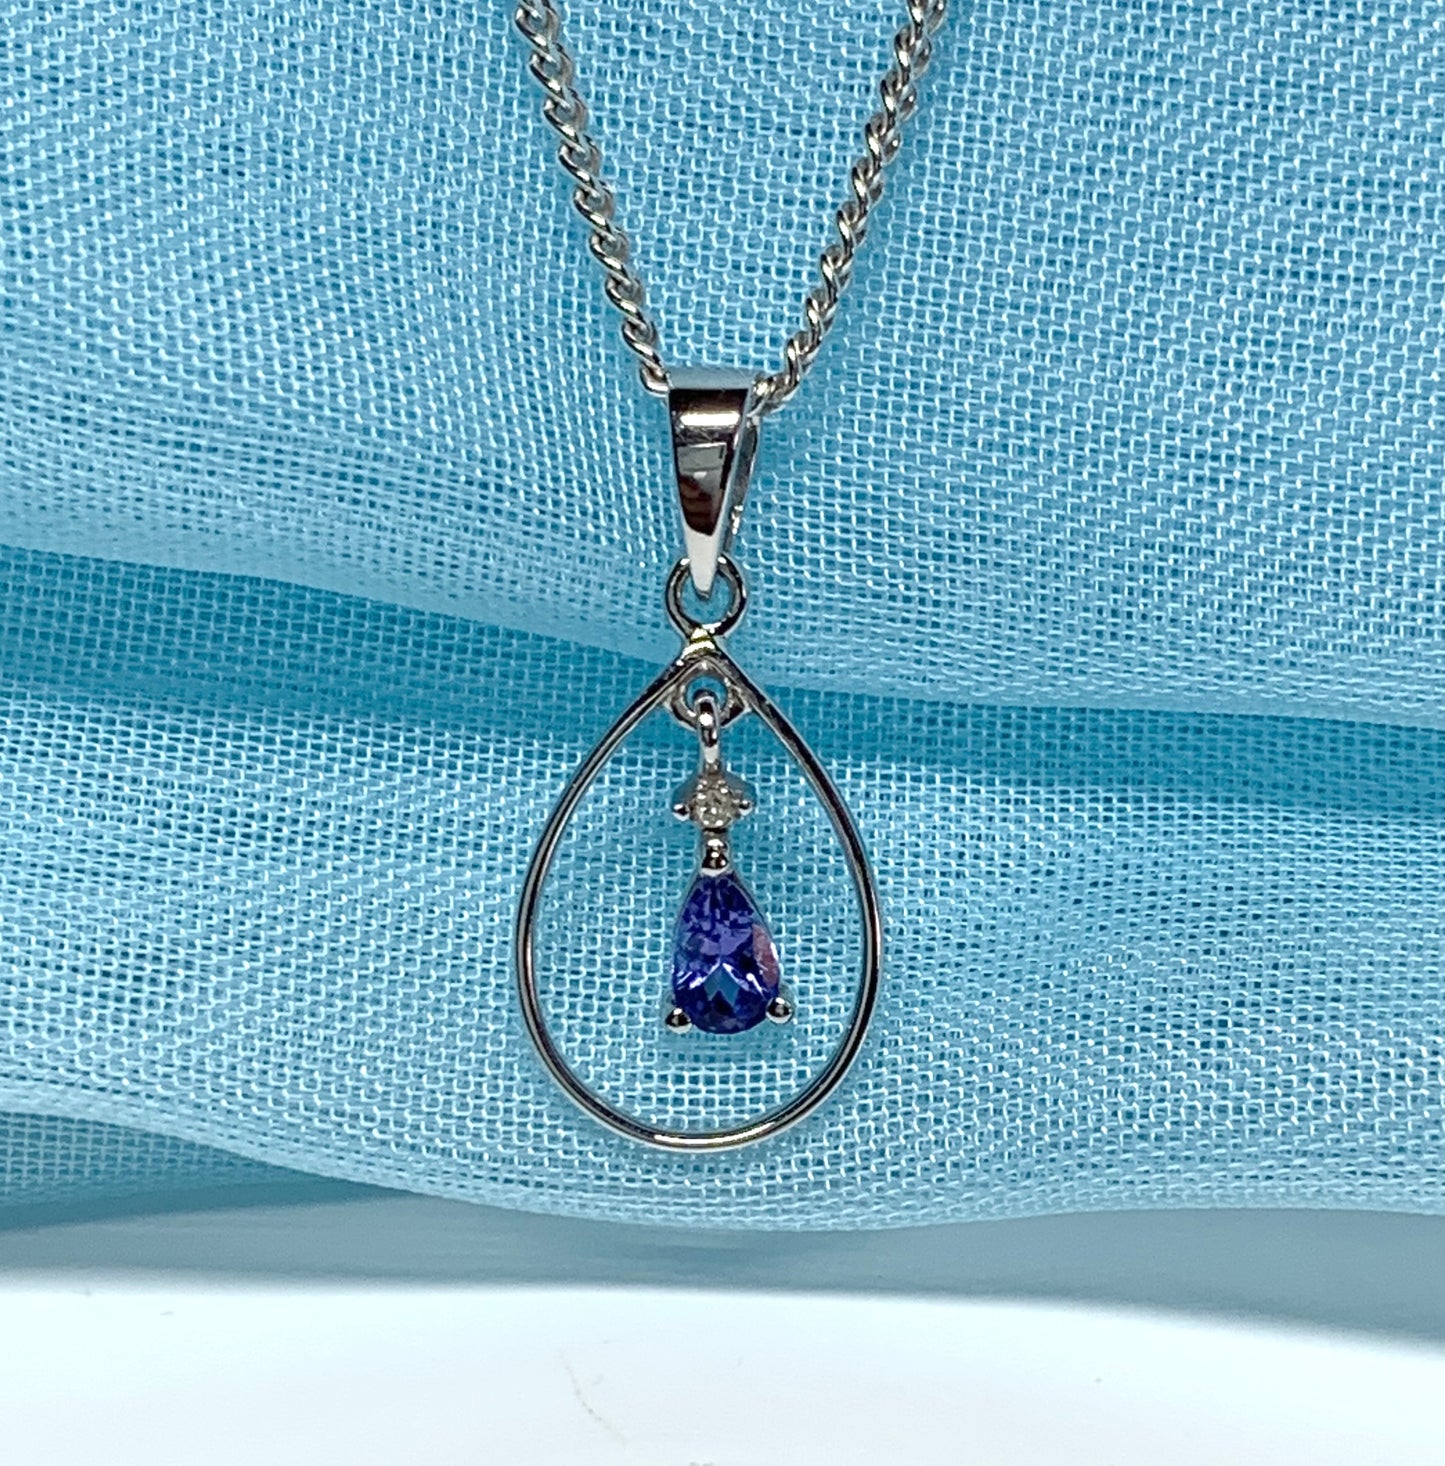 Real tanzanite and diamond necklace white gold open pear shaped